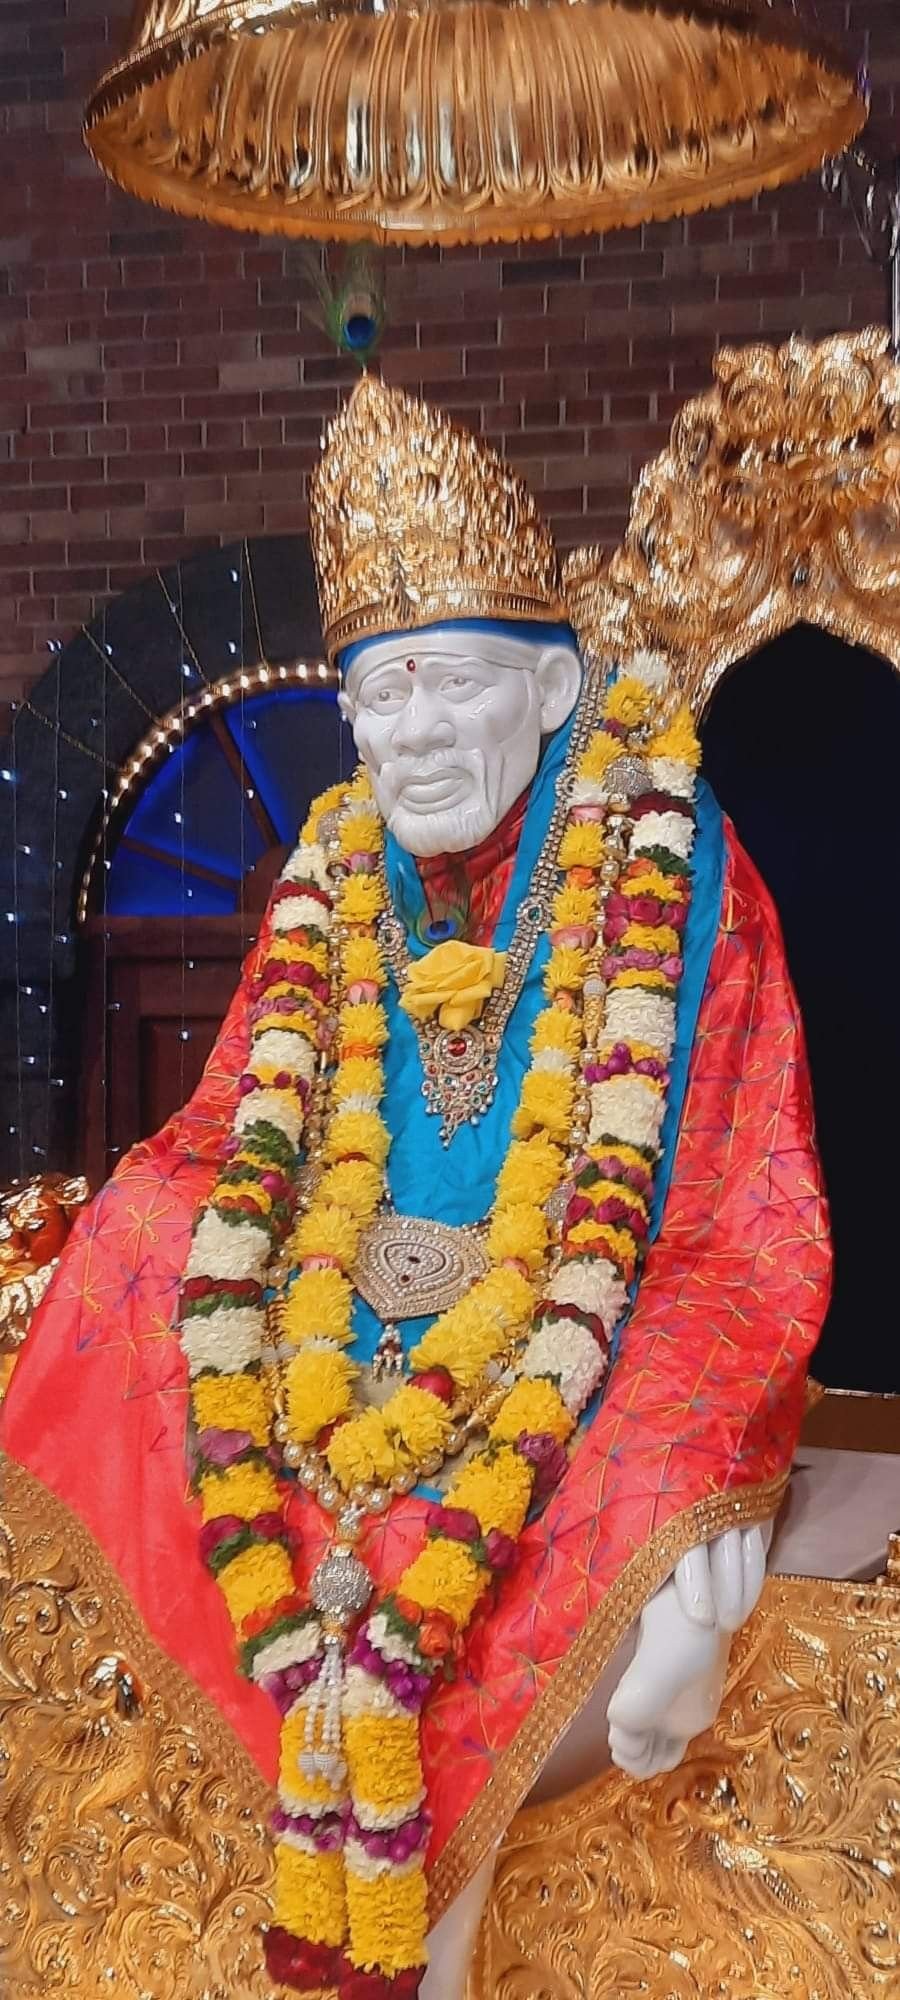 Good Morning Images With Sai Baba Images